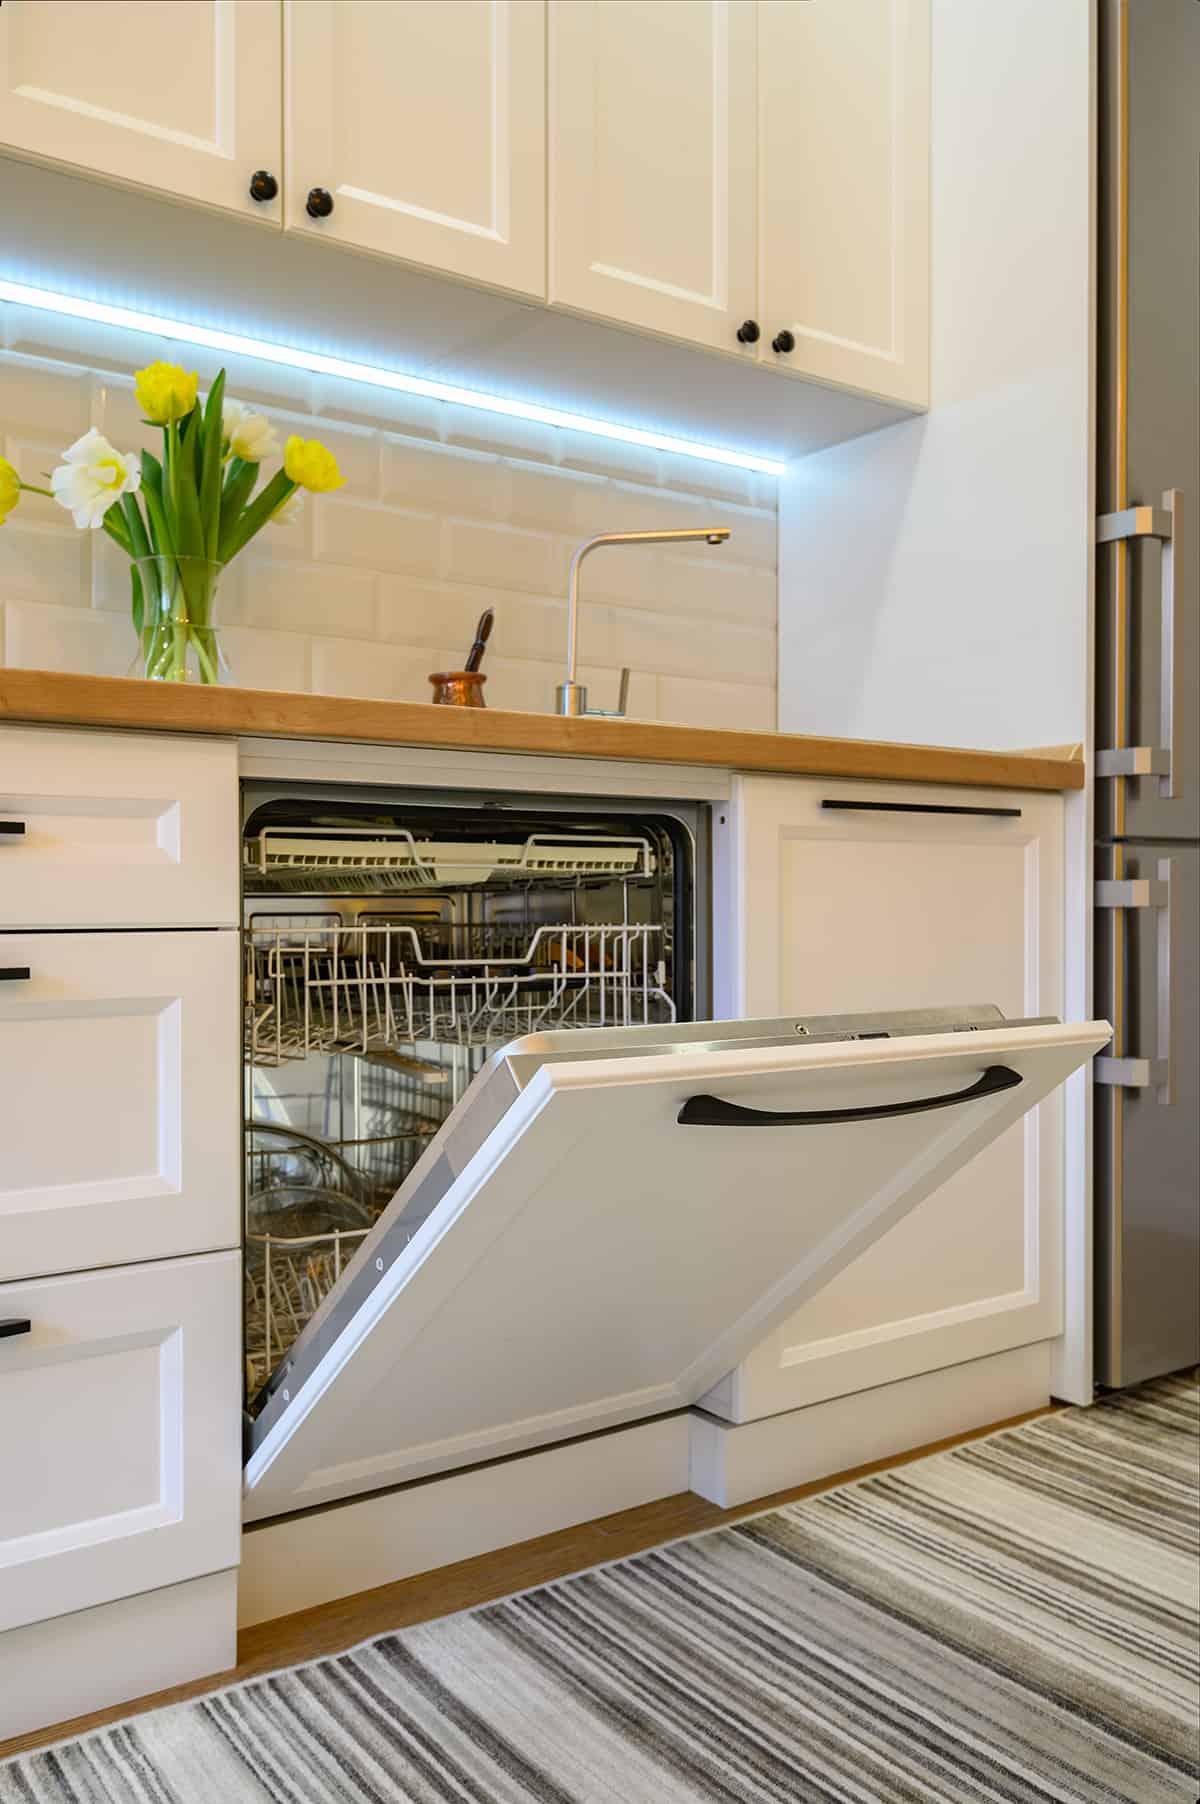 Install an integrated dishwasher